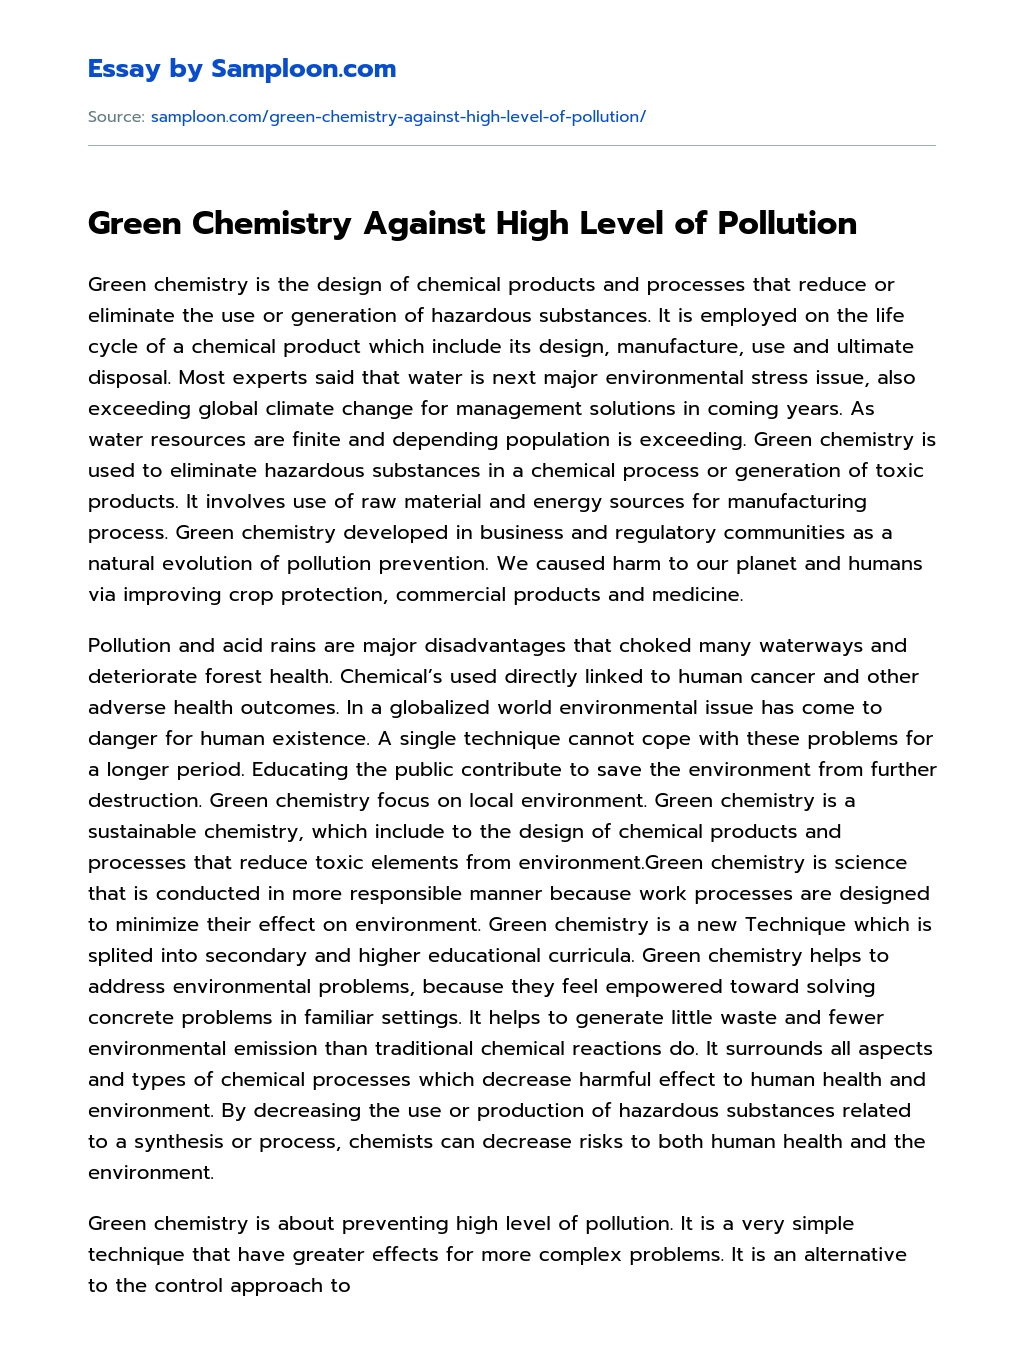 Green Chemistry Against High Level of Pollution essay